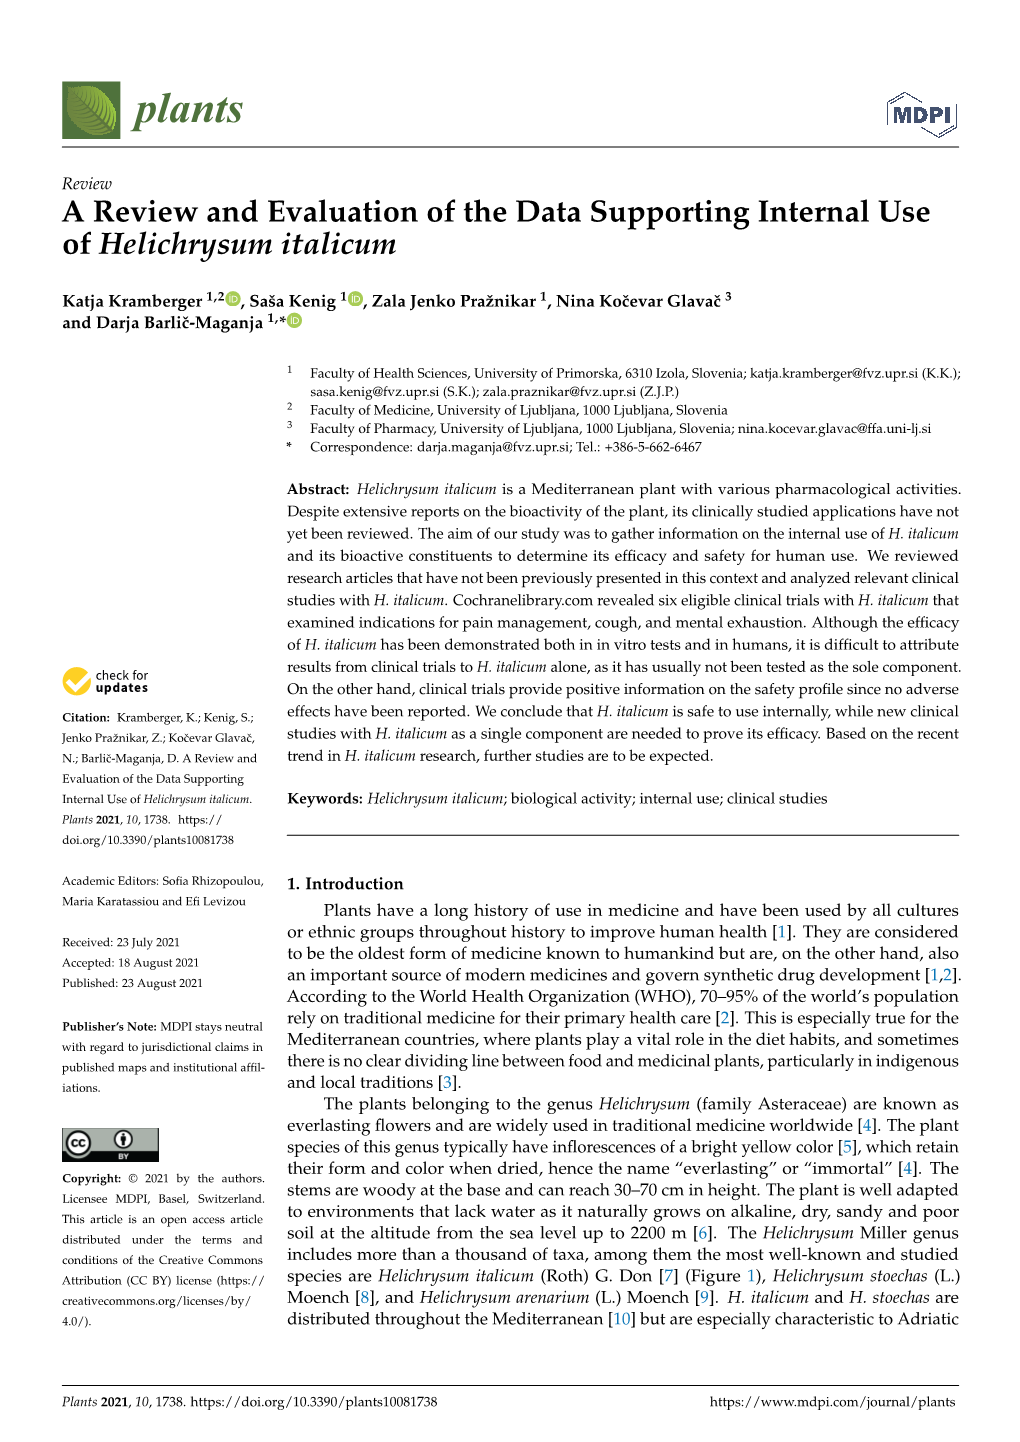 A Review and Evaluation of the Data Supporting Internal Use of Helichrysum Italicum